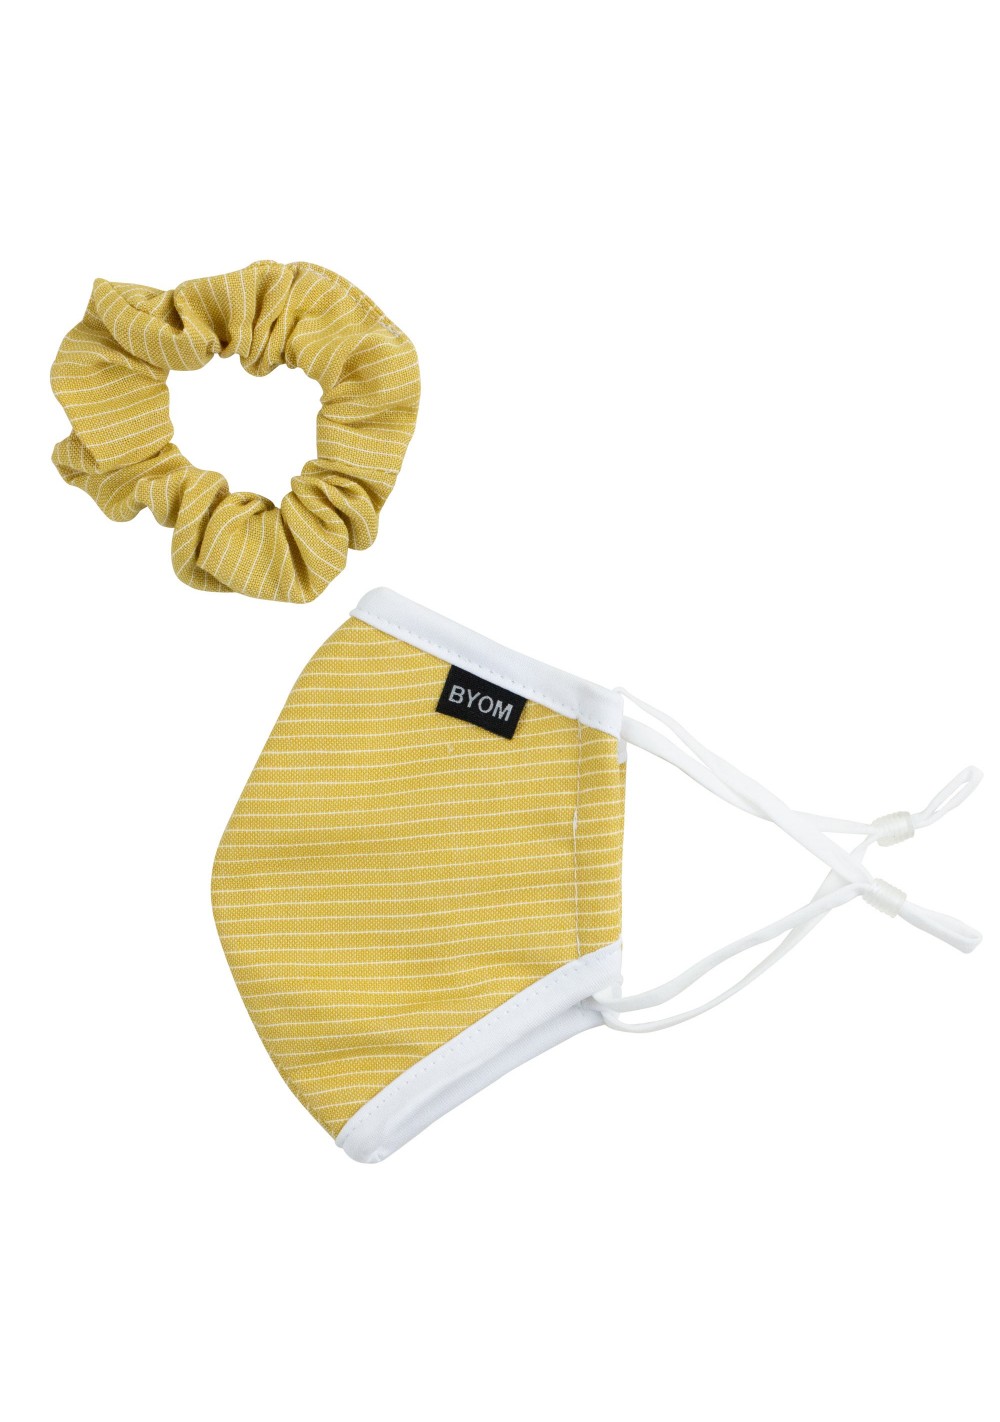 gold face mask for kids in cotton with scrunchie